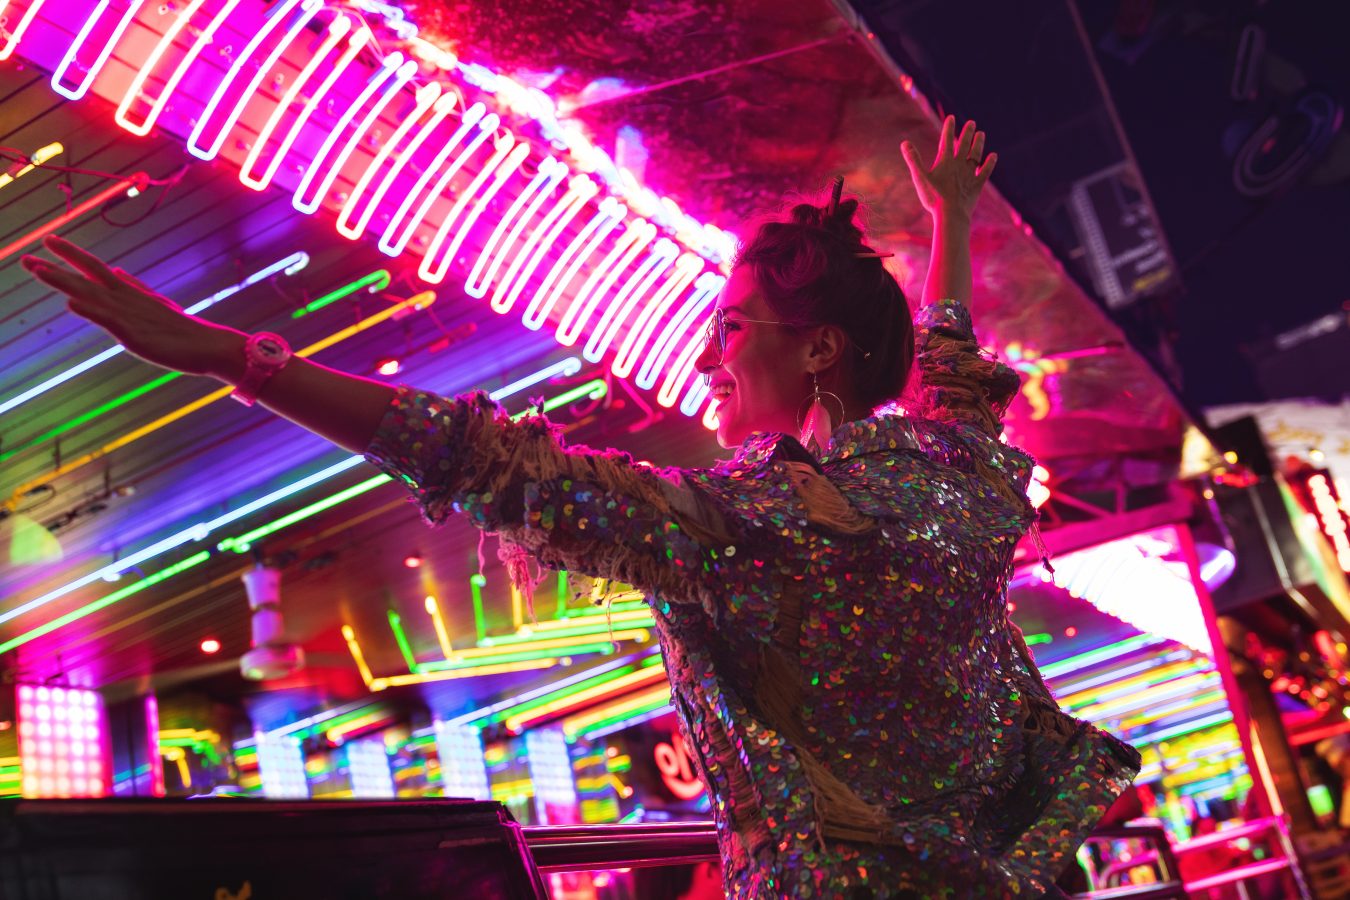 A young woman dances, backlit by the neon signs of the party scene she is at - like in Thailand, one of the world's top party destinations.